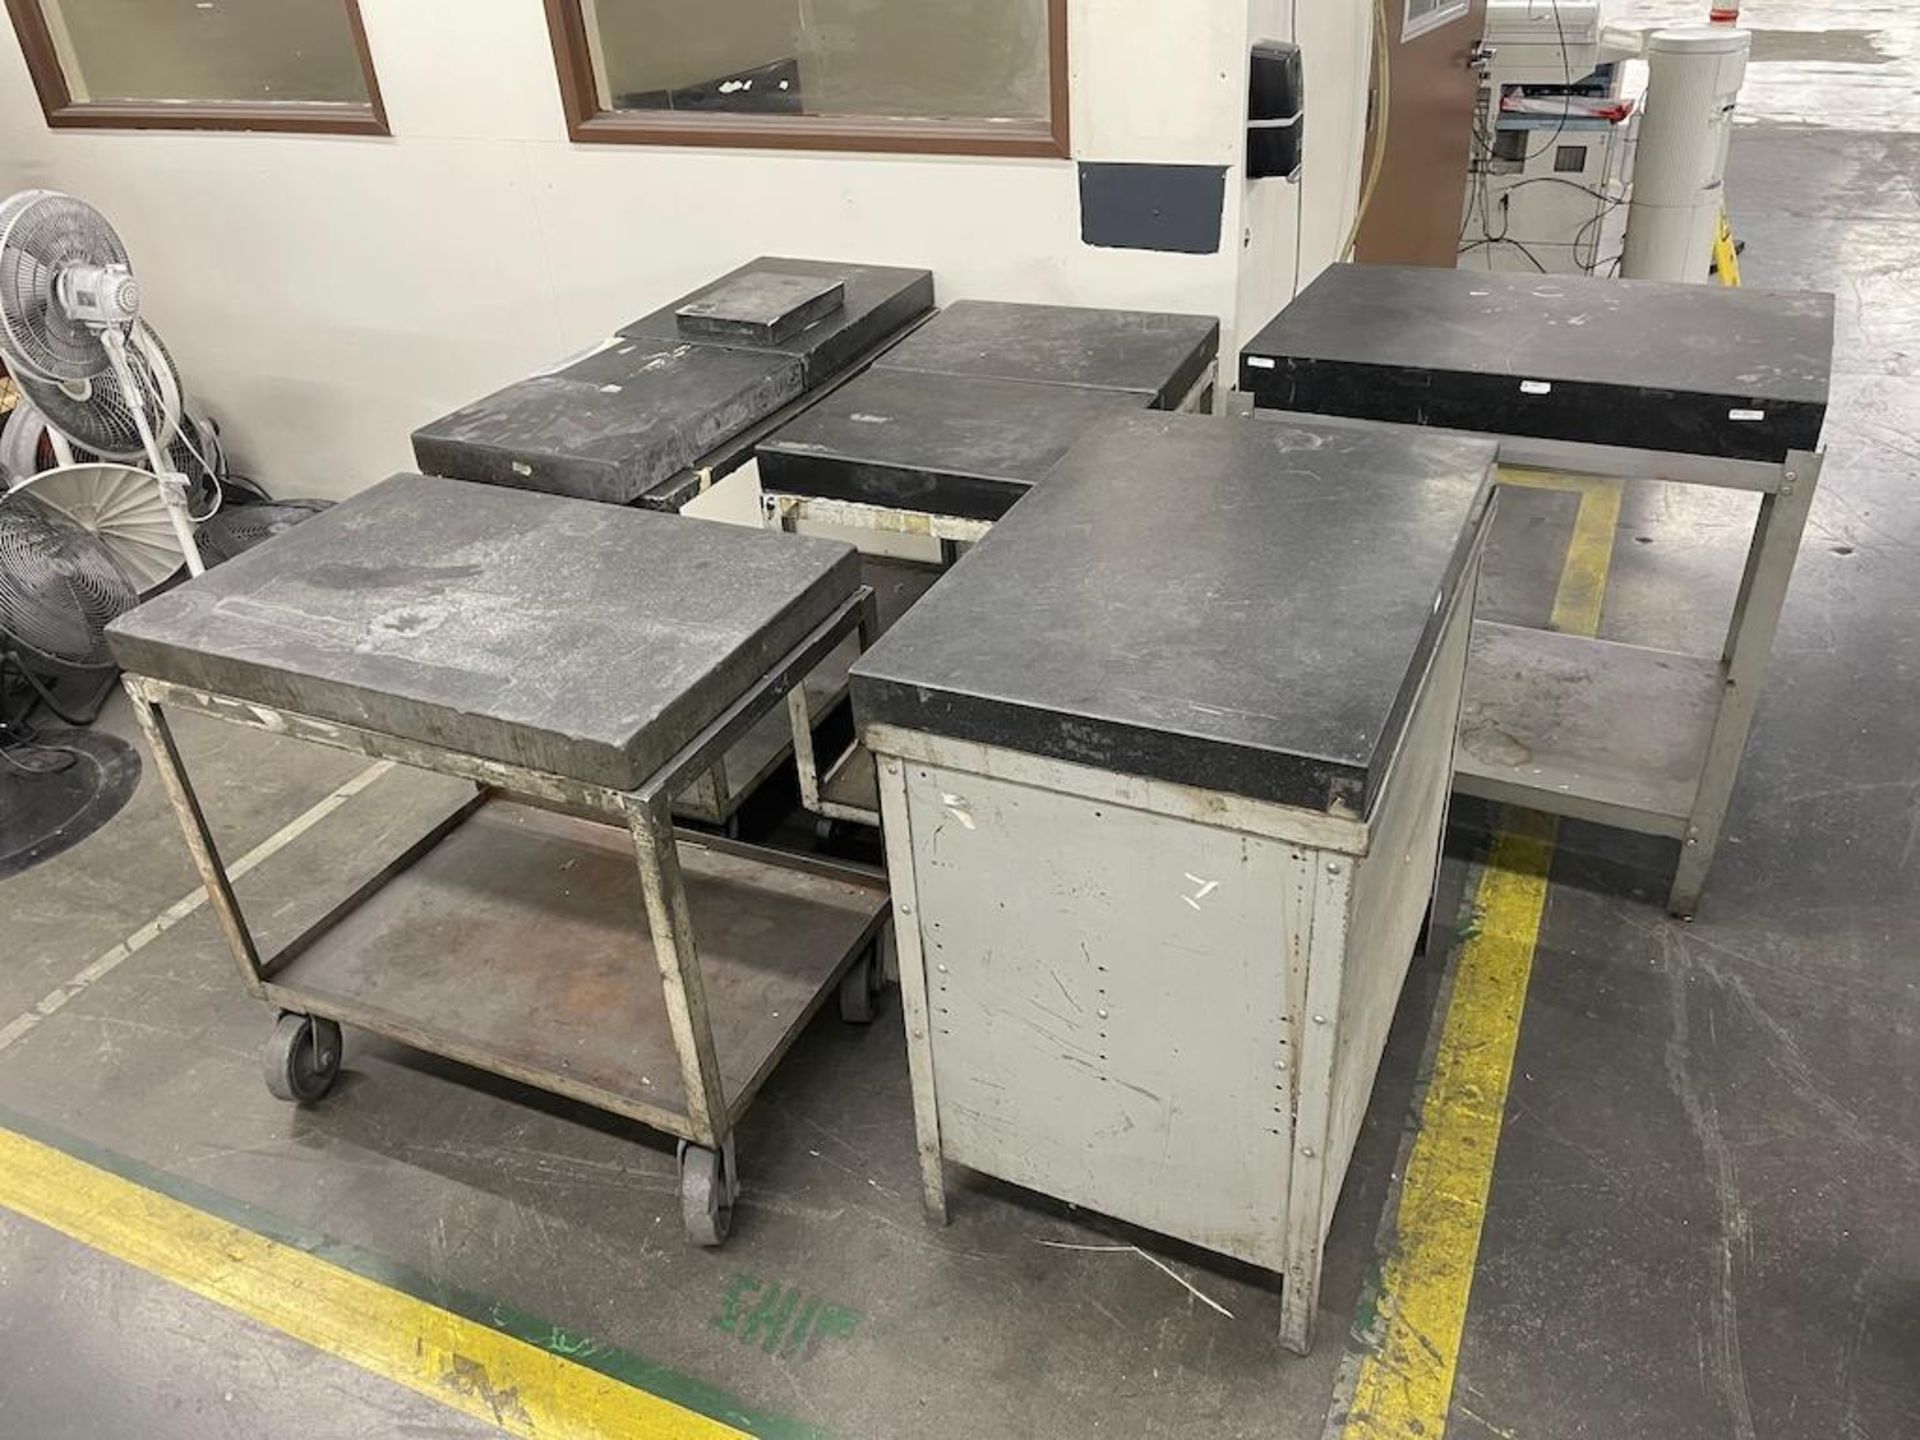 LOT 8 PRECISION MARBLE PLATES ON 6 HD CARTS INCLUDING (3) 24 IN X 36 IN, (4) 18 IN X 24 IN